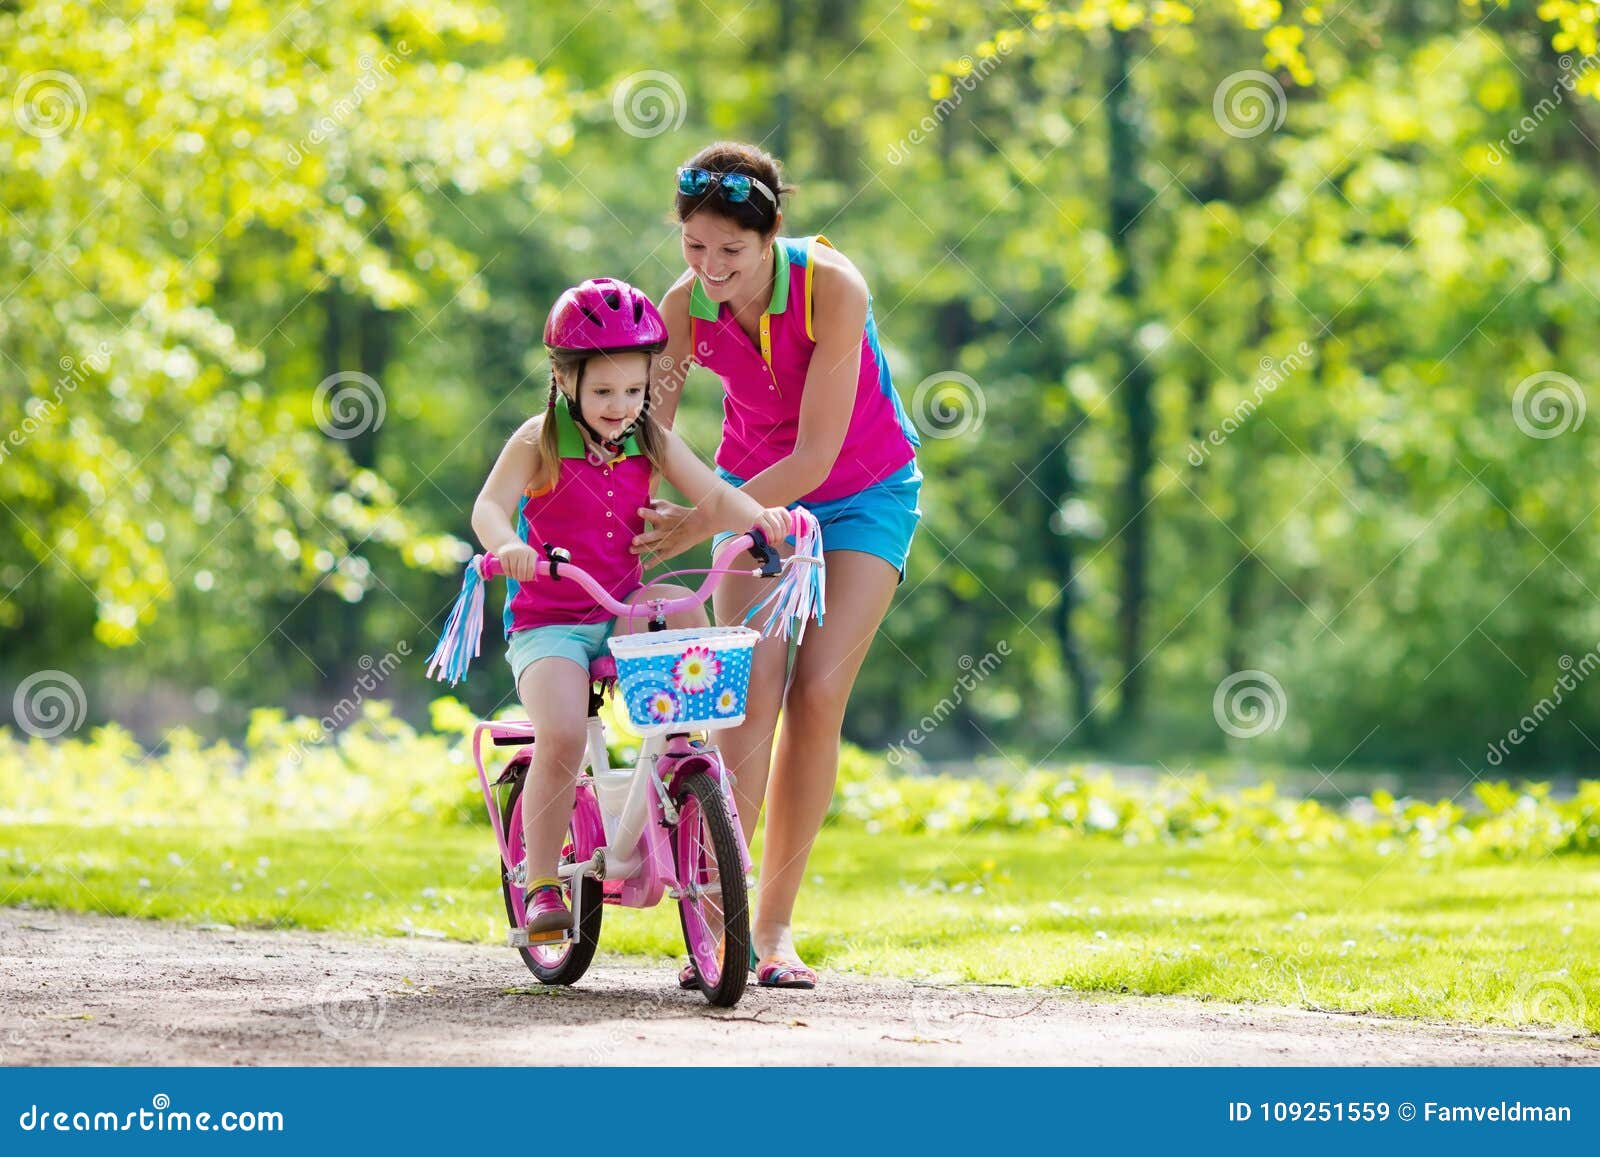 best way to teach a child how to ride a bike